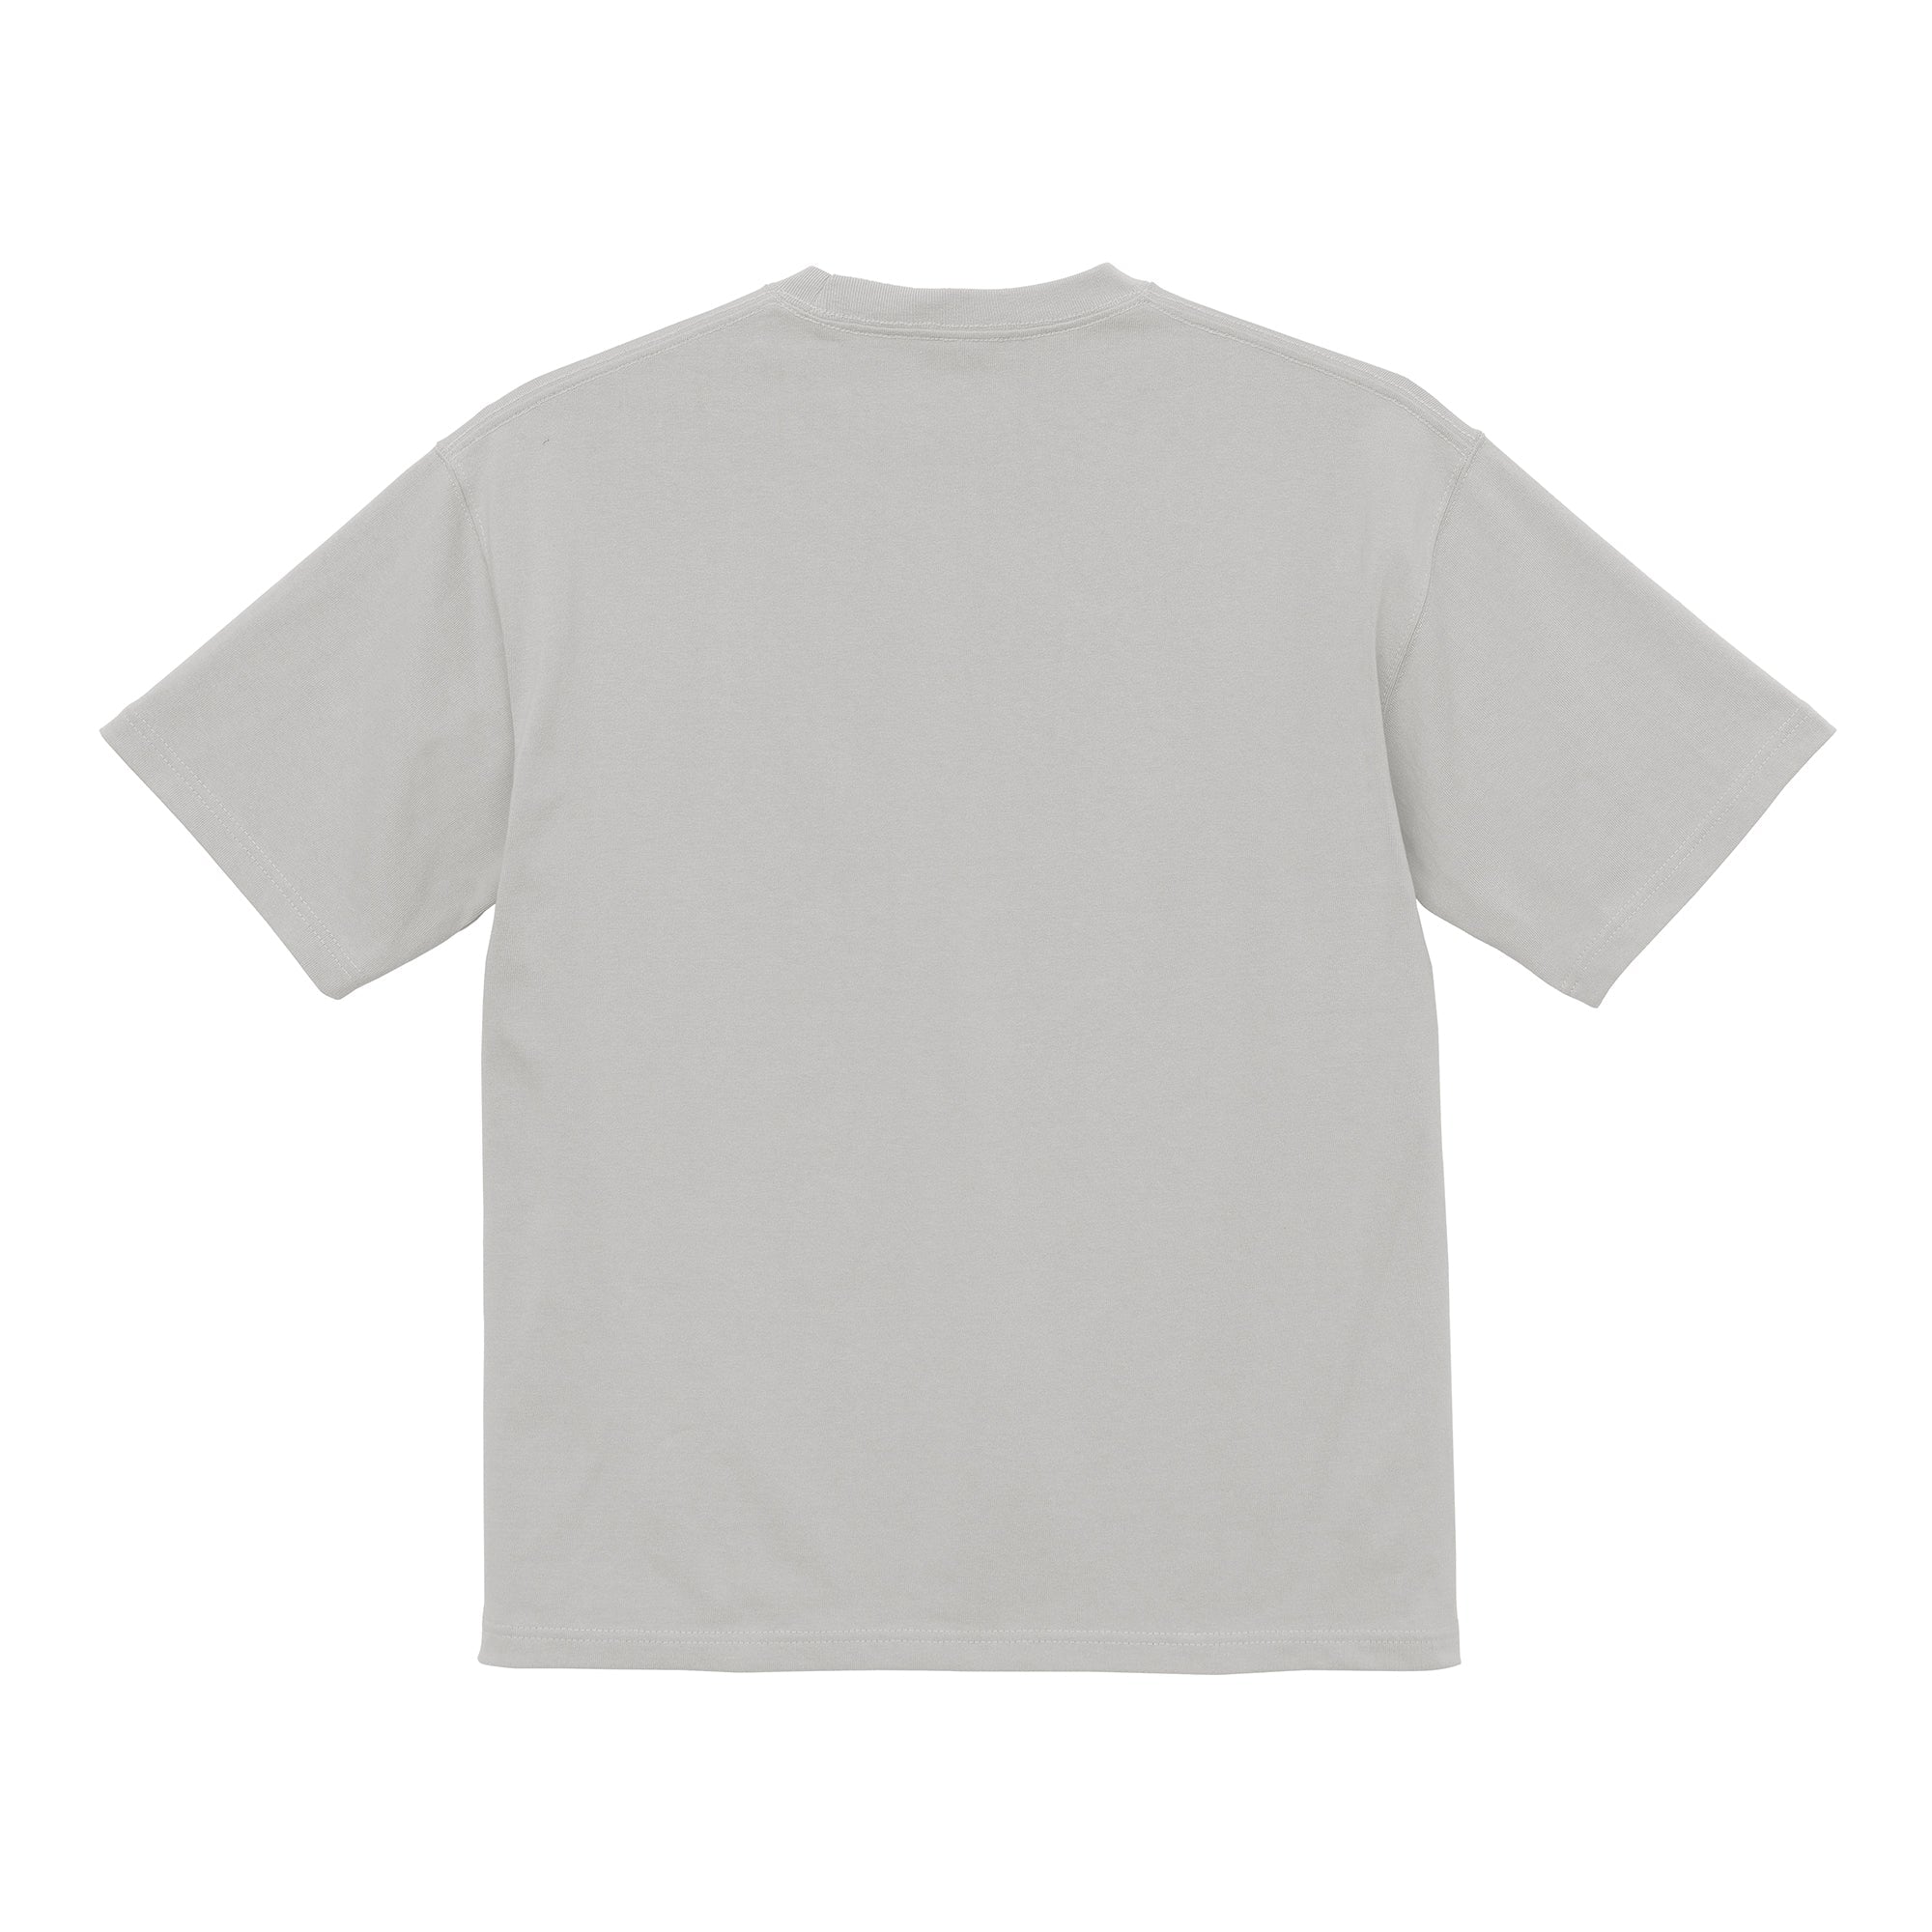 4411 - 9.1oz Magnum Weight Big Silhouette T-shirt - Frost Grey x 2